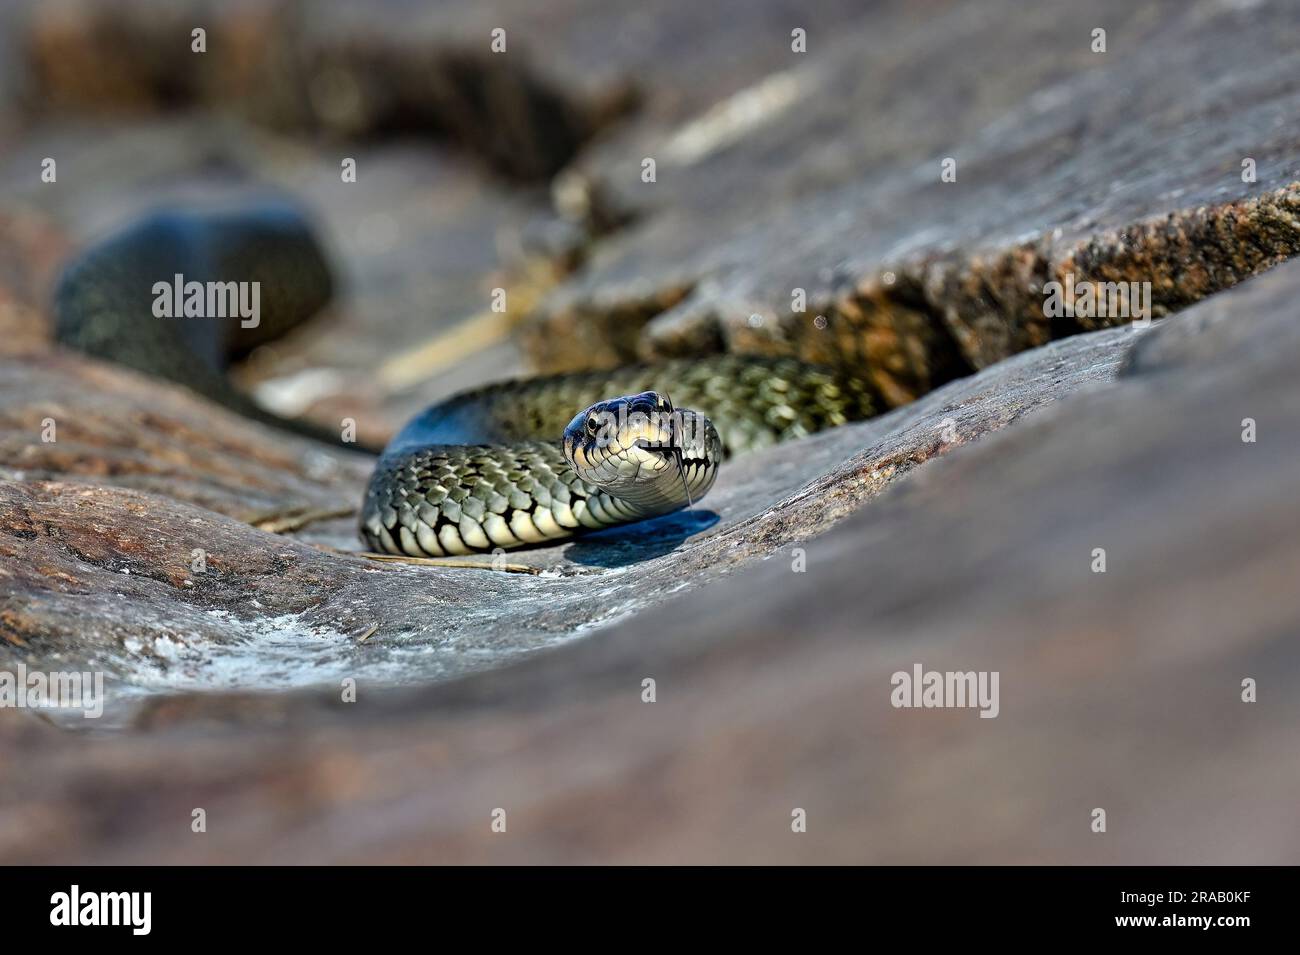 Grass snake basking in the rock crevise Stock Photo